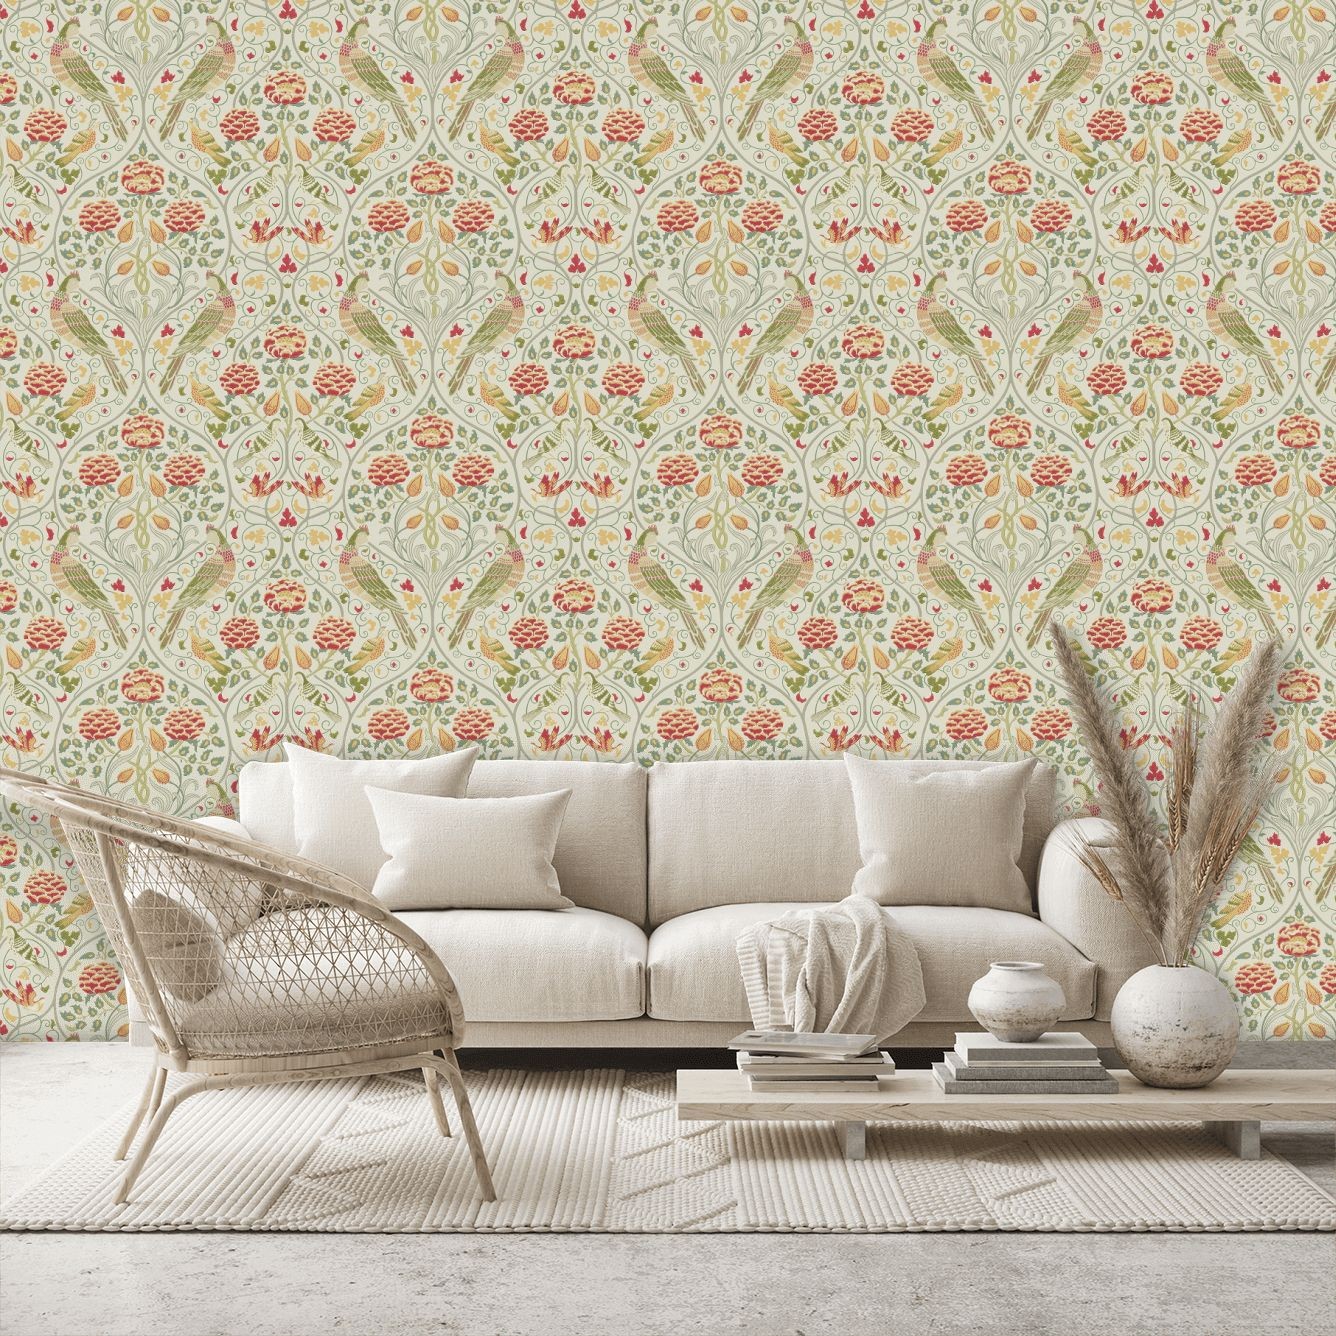 Seasons by May Wallpaper - Linen - By Morris and Co - 216687